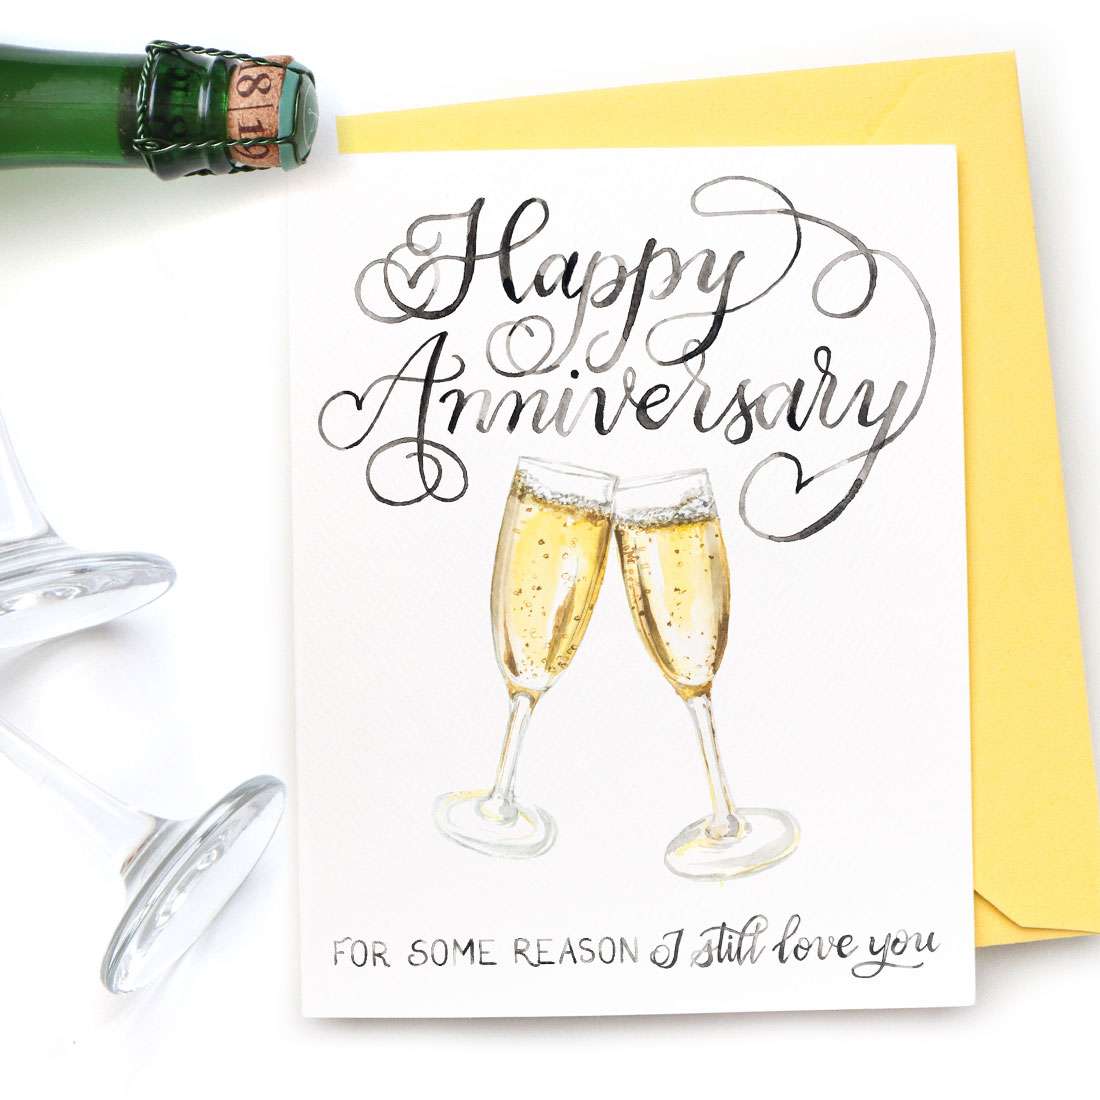 Image of a hand-lettered watercolor card saying "Happy Anniversary" with two painted champagne glasses by CharmCat | charmcat.net